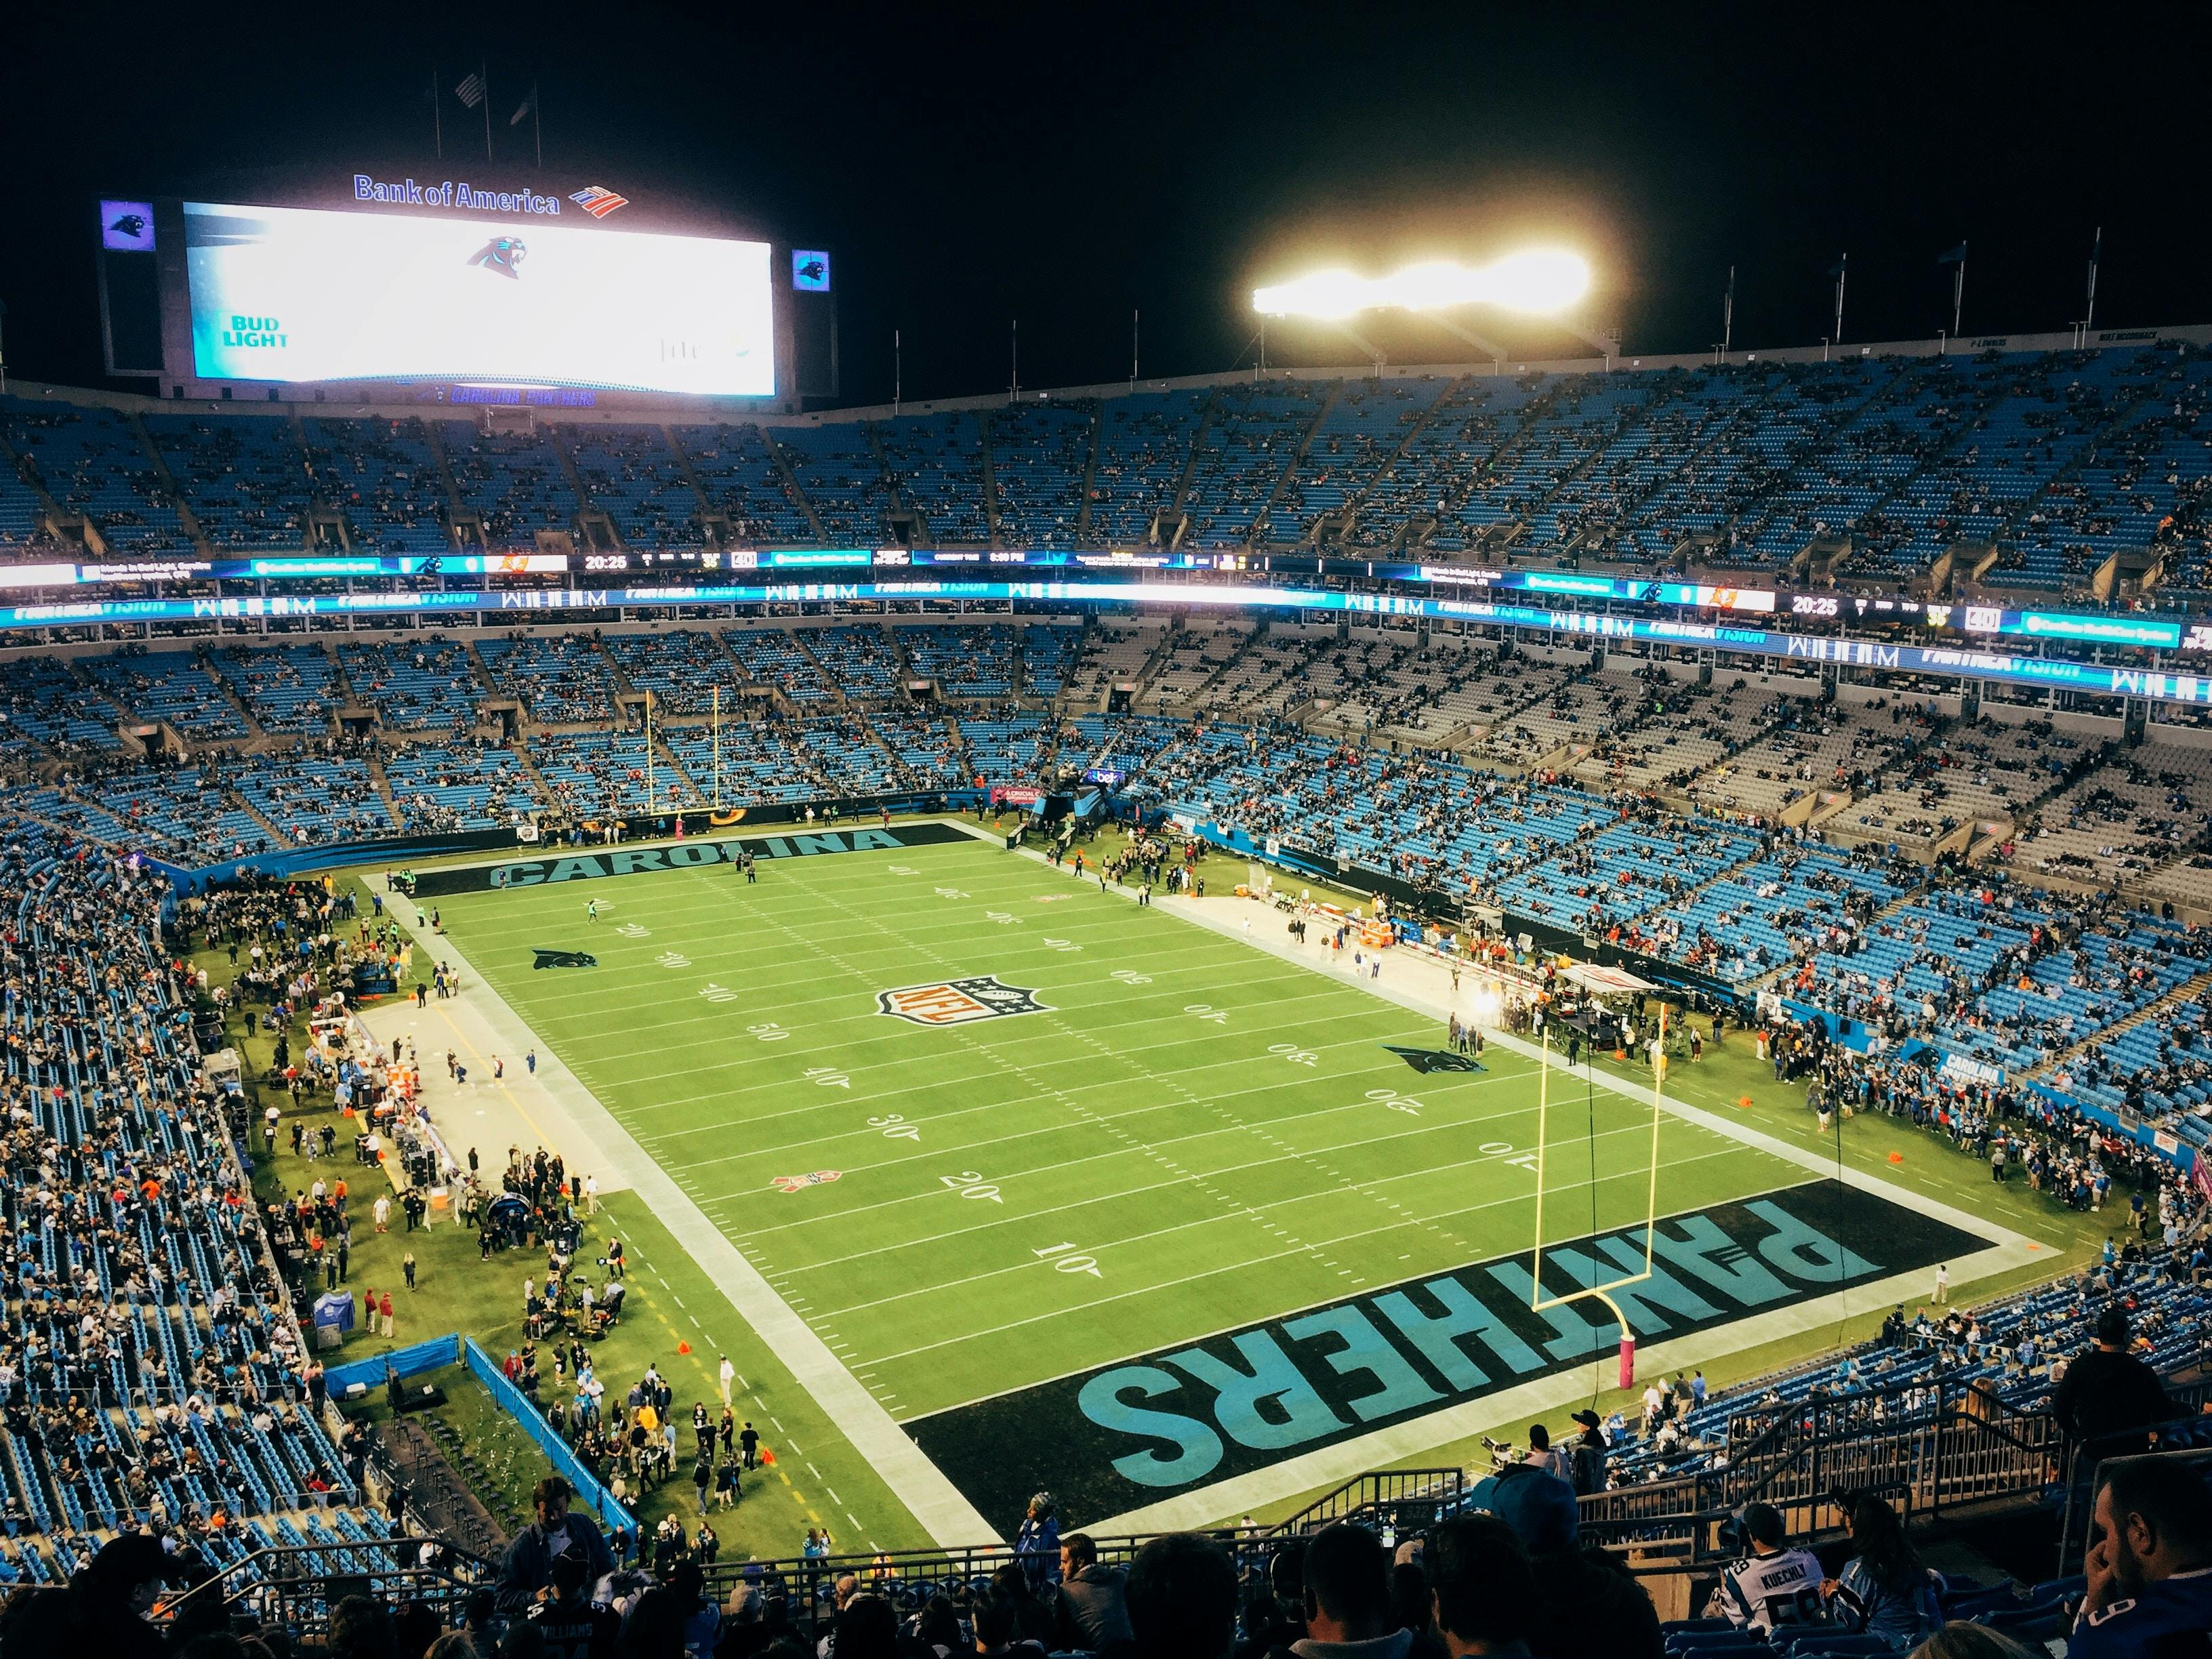 Bank of America Stadium visitor guide: everything you need to know - Bounce